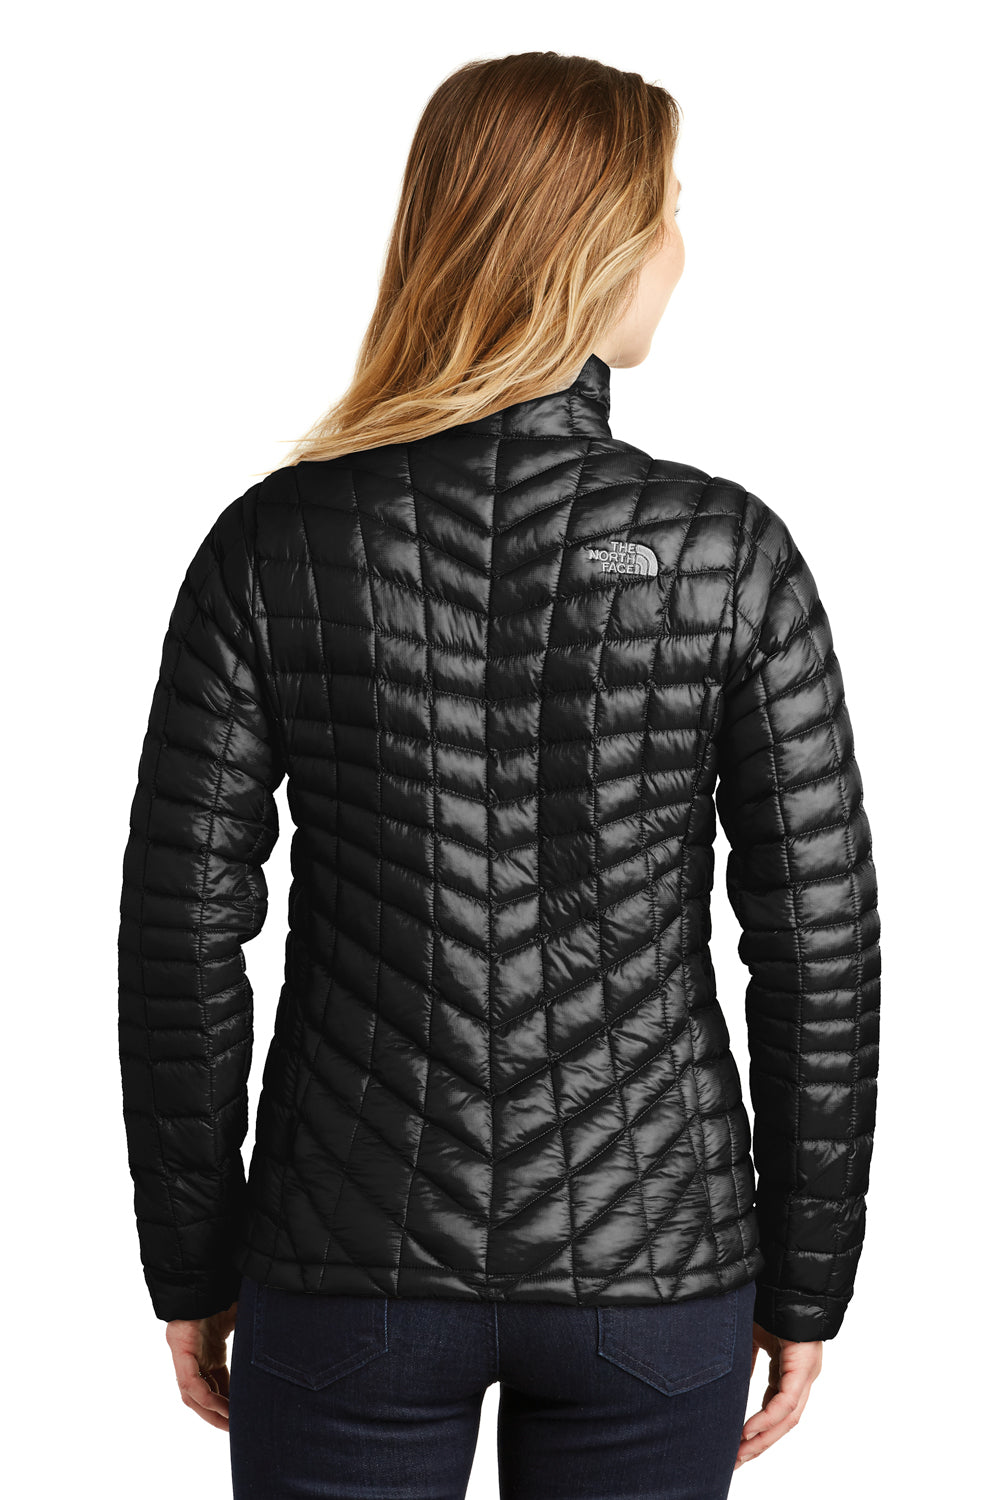 The North Face NF0A3LHK Womens ThermoBall Trekker Water Resistant Full Zip Jacket Black Back